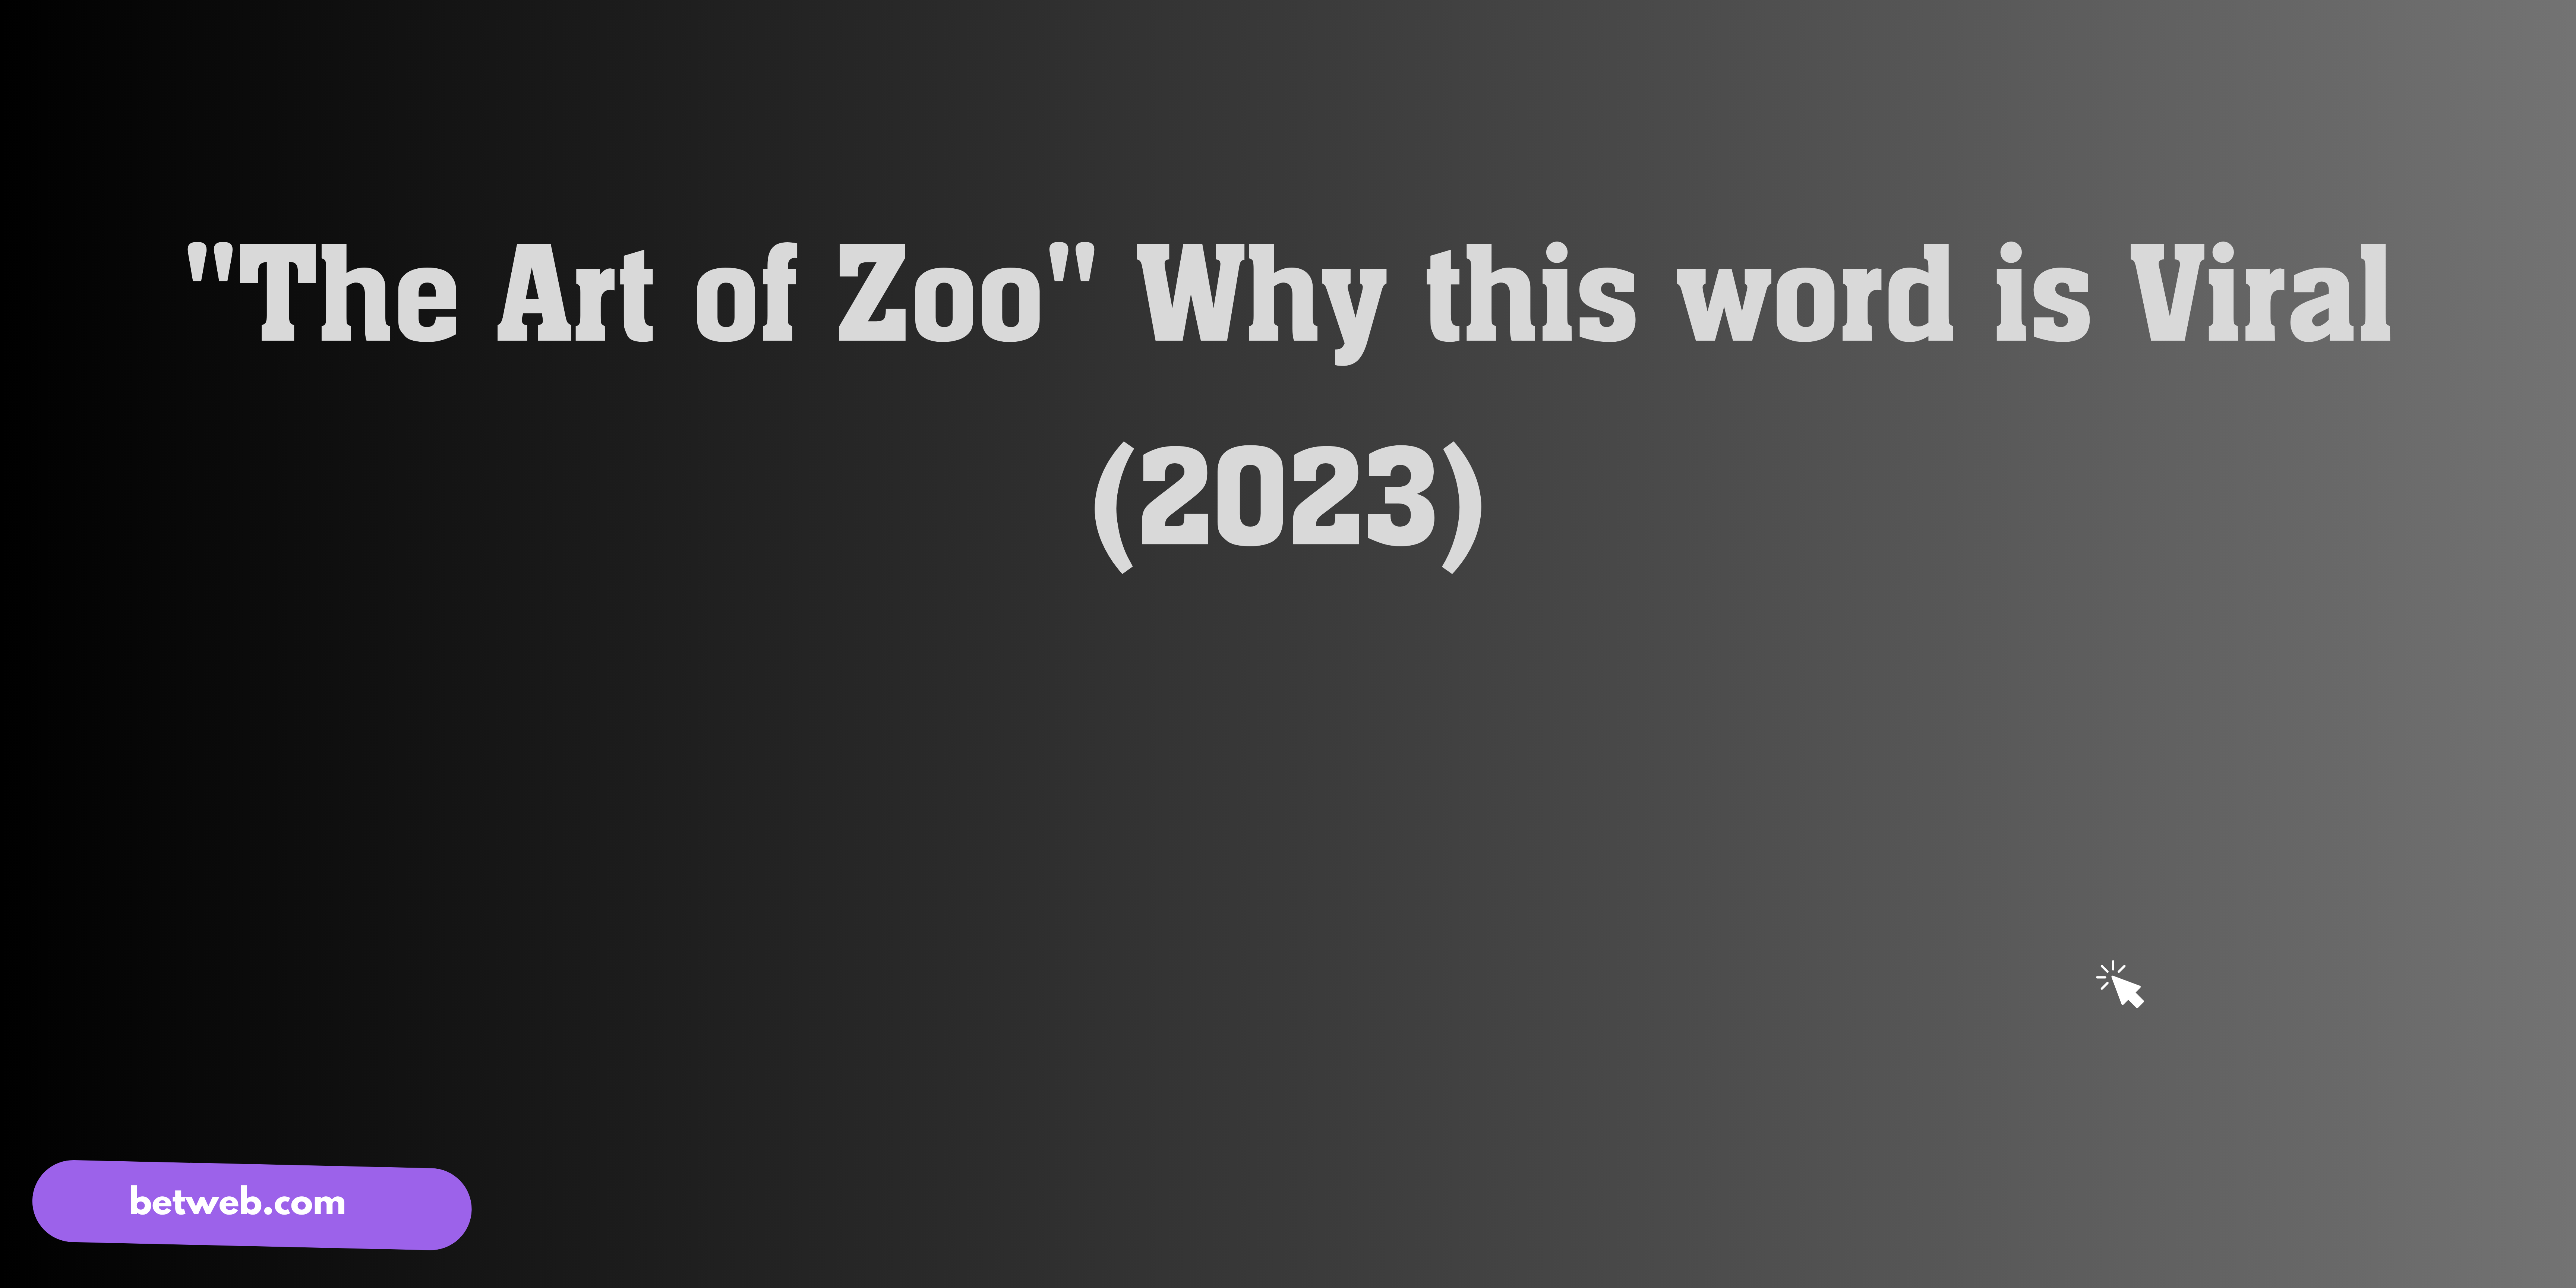 "The Art of Zoo" Why this word is Viral (2023)